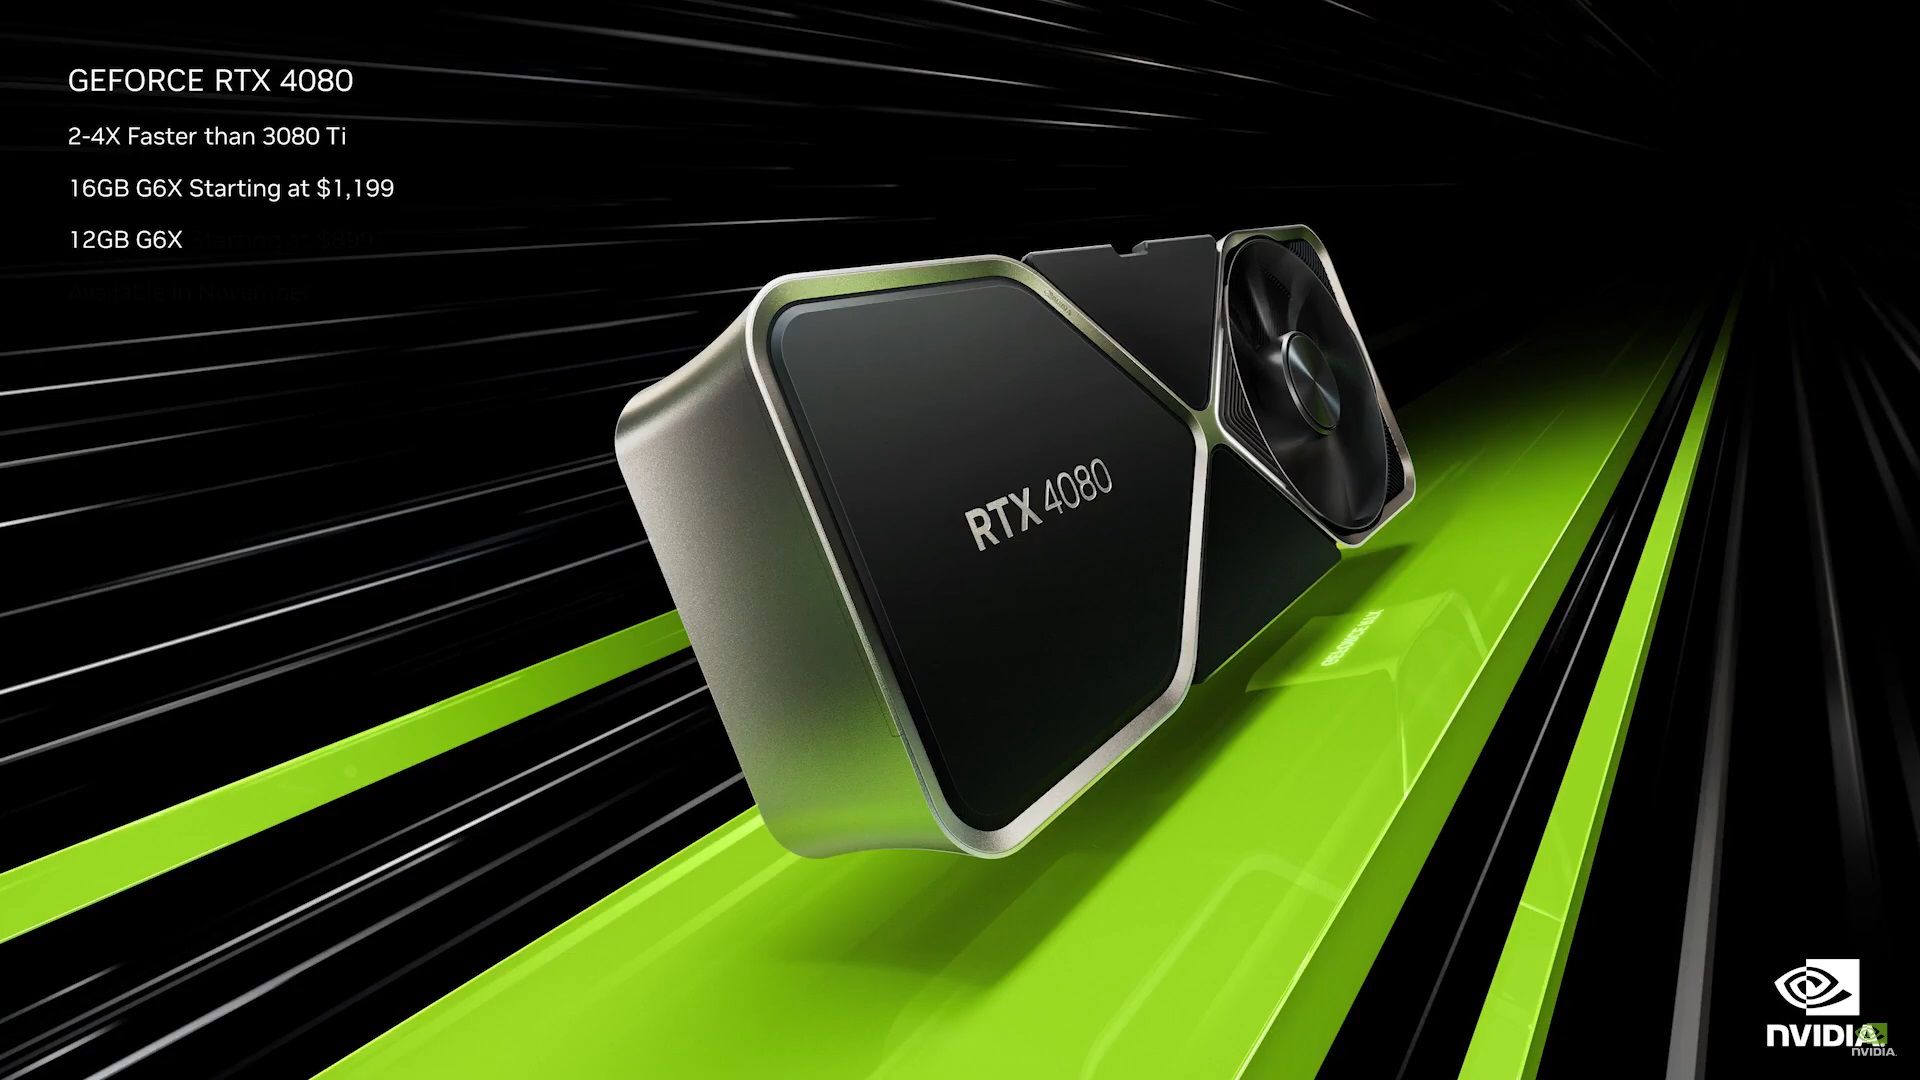 nvidia rtx 4080 launch date and prices with gpu image